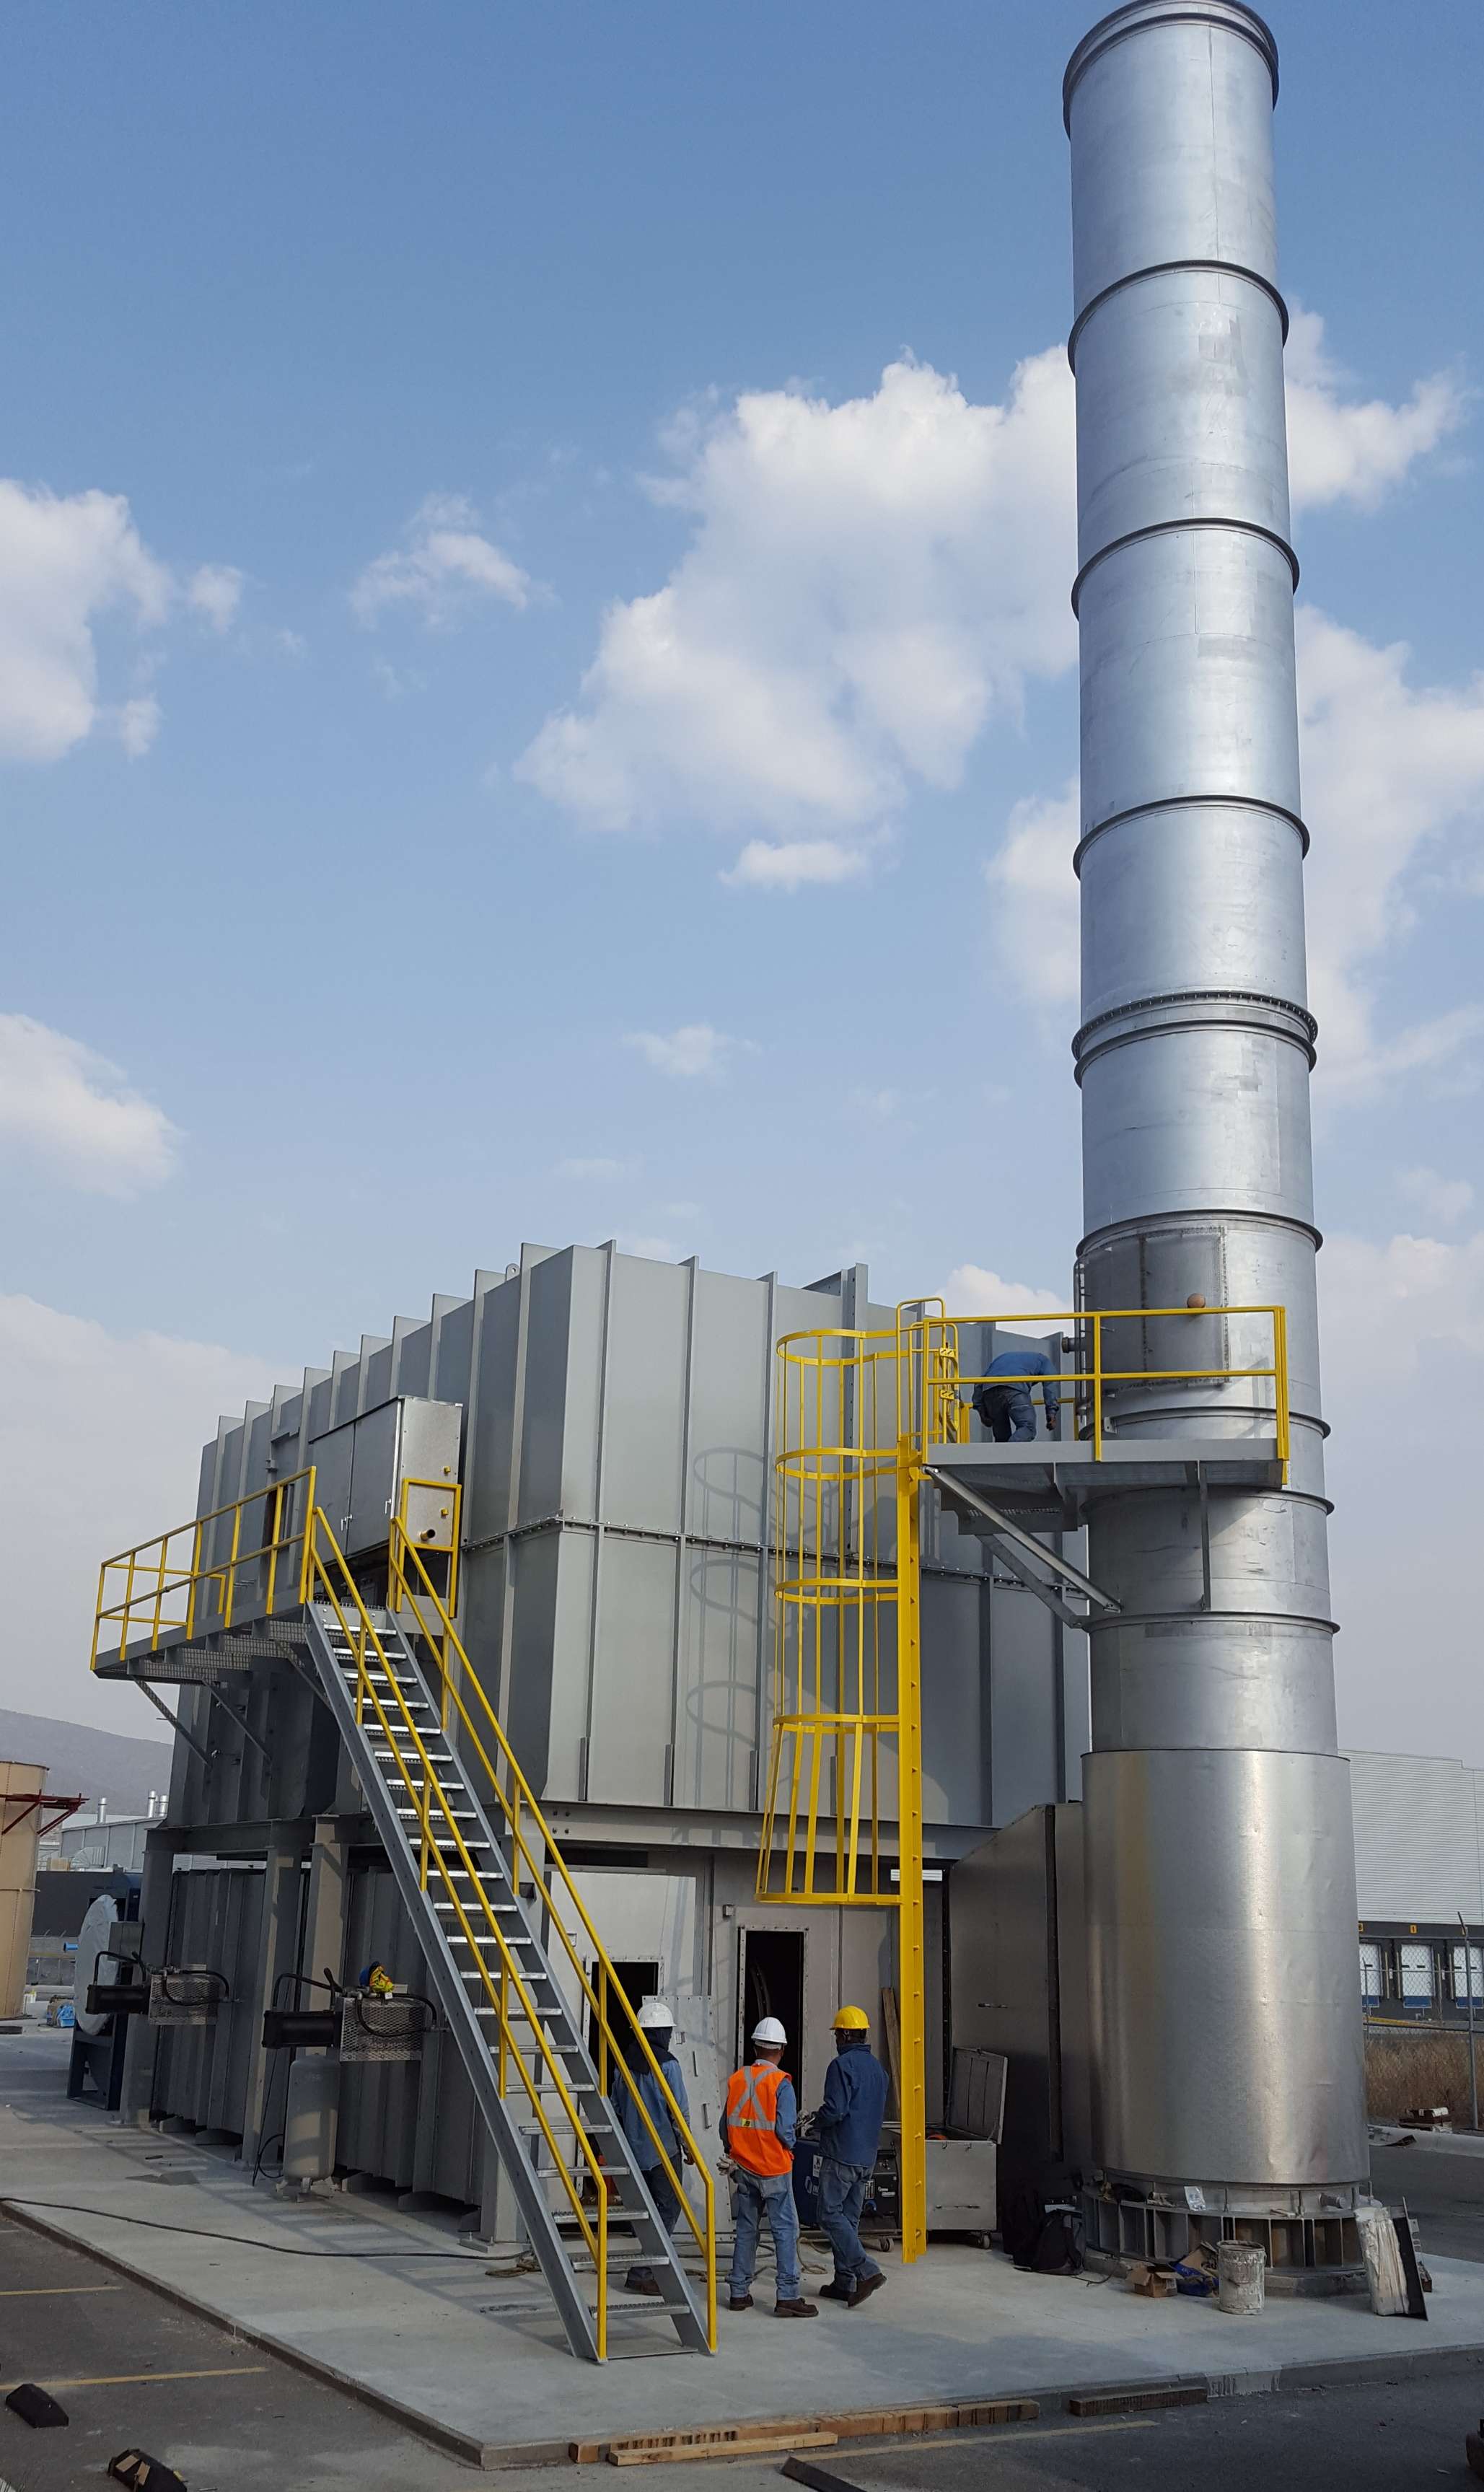 Regenerative Thermal Oxidizer product installed in Mexico